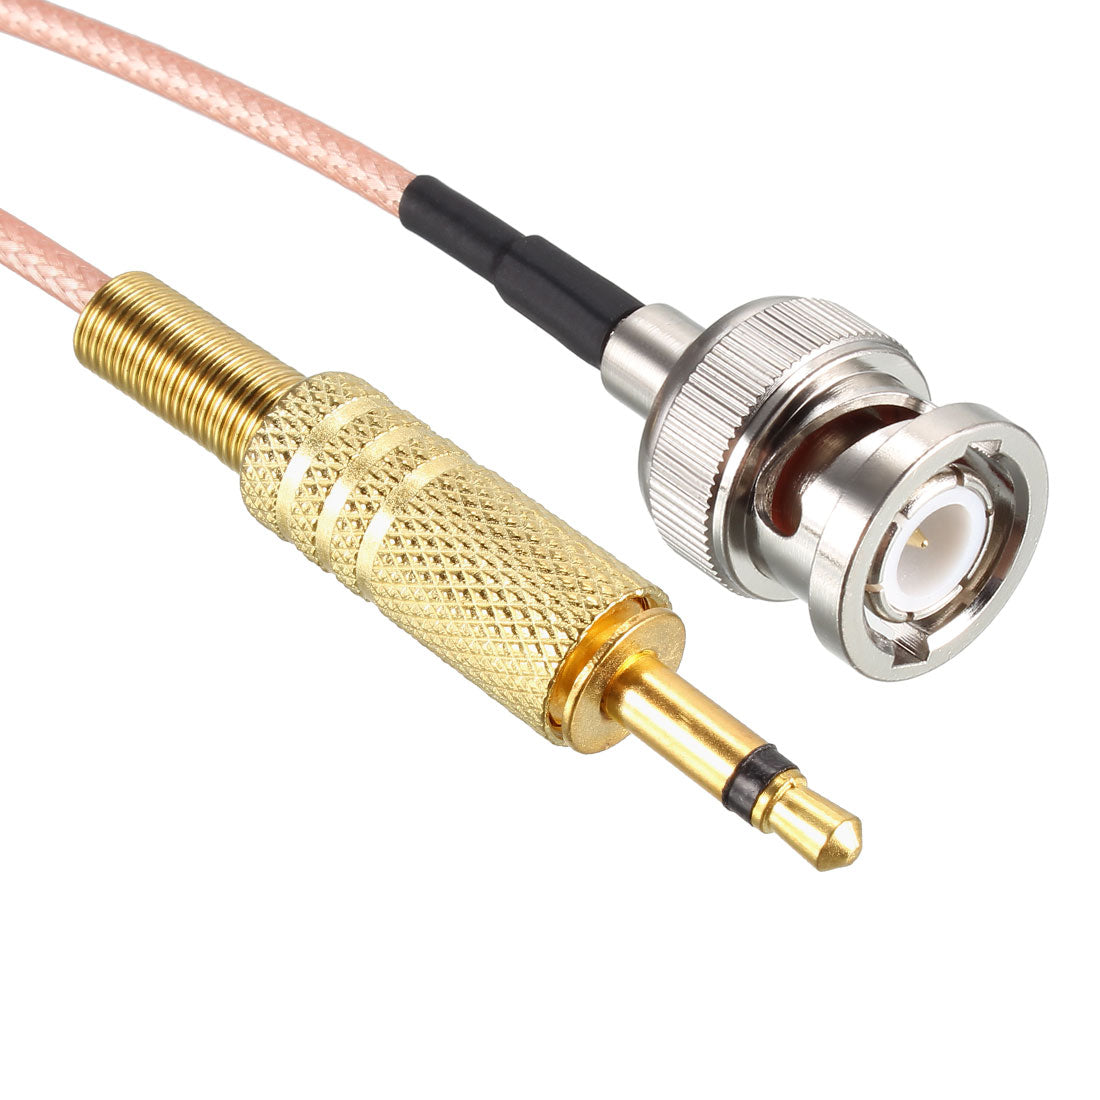 uxcell Uxcell BNC Male to 3.5mm (1/8") Male Coaxial Power Audio Cable Jumper Cable